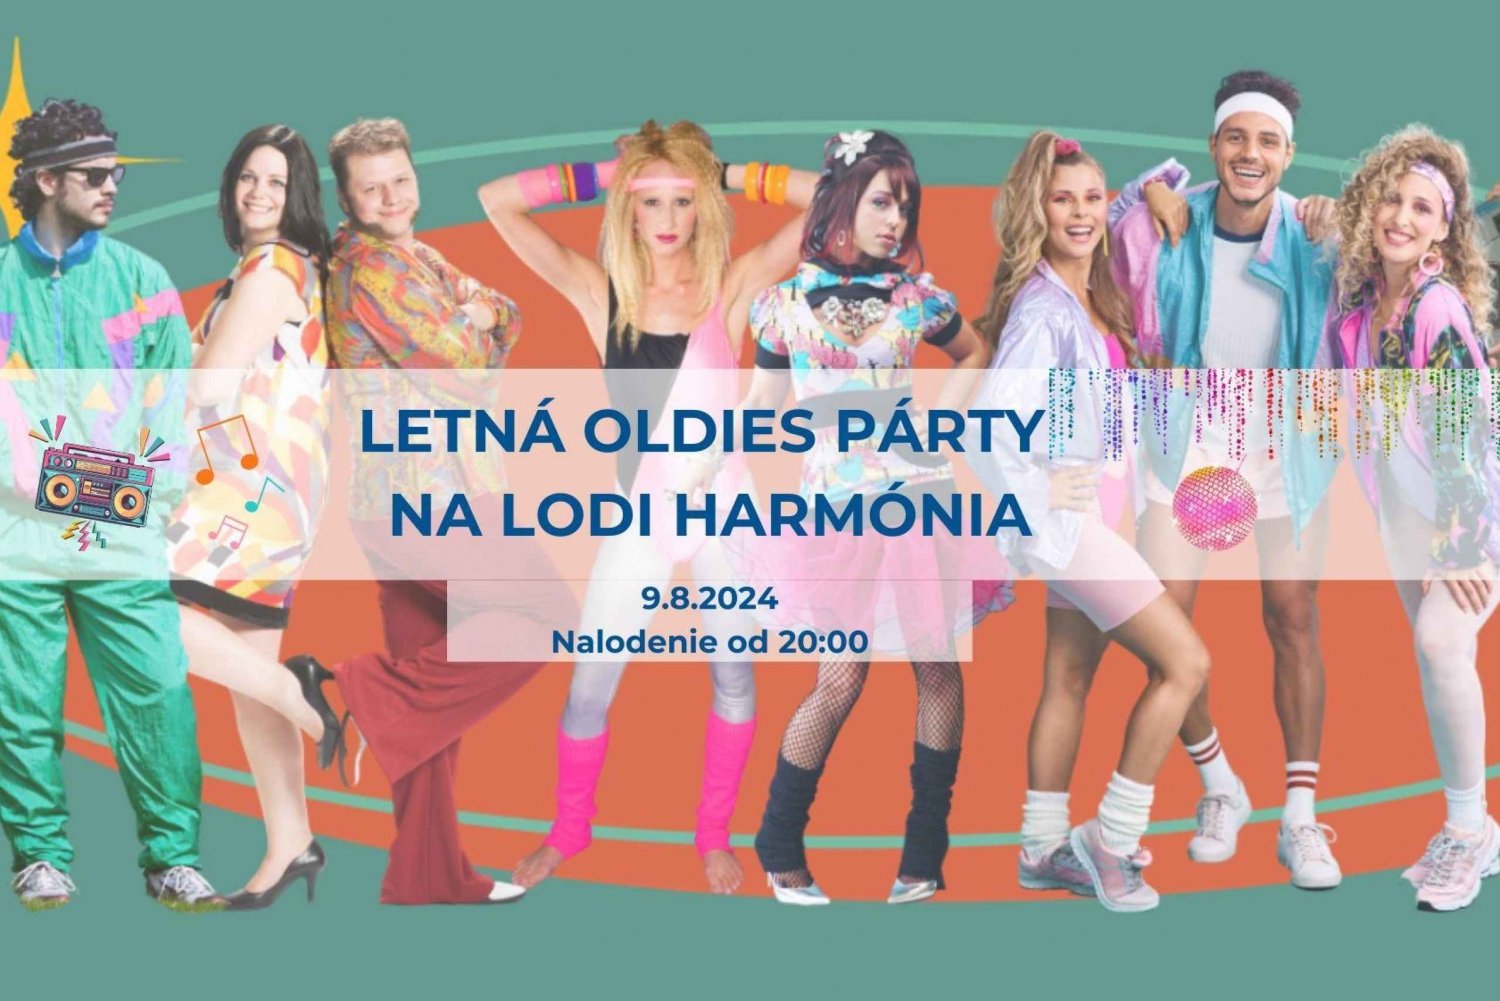 Bratislava Boat Party: Summer Oldies Party